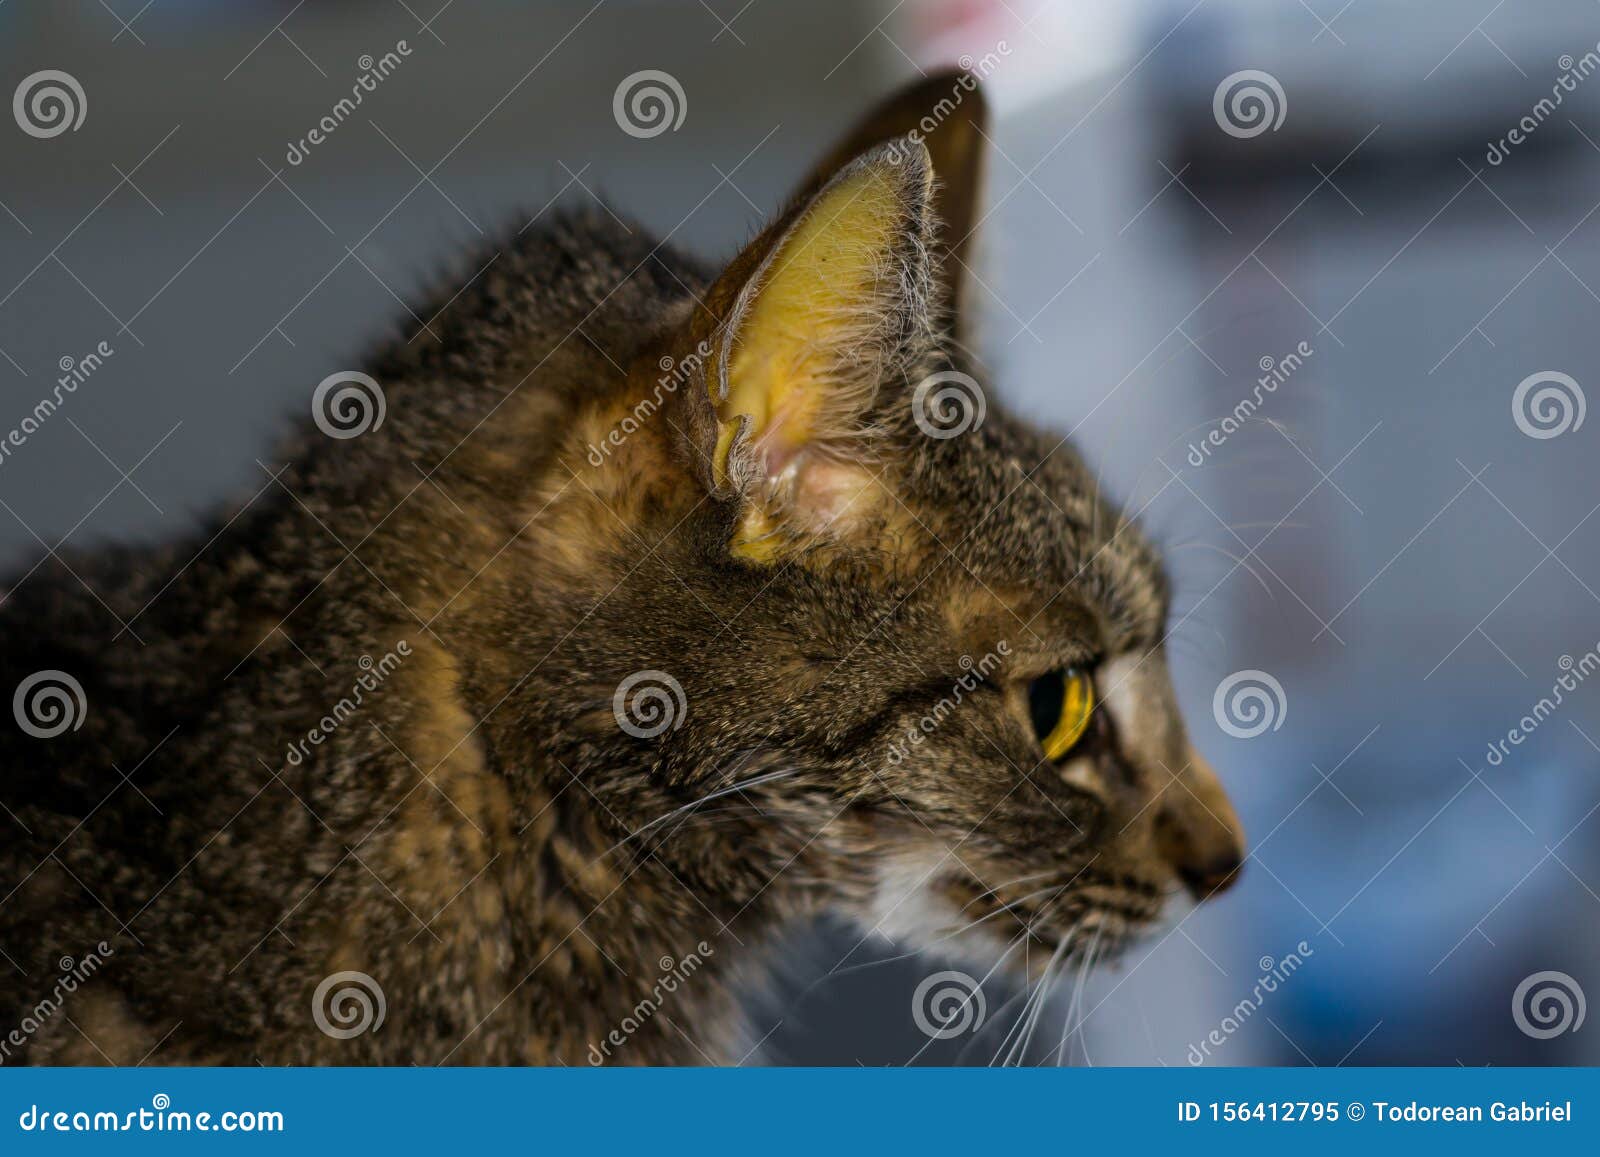 Adult Cat With Liver Failure, Jaundice Skin And Dehydration Stock Image